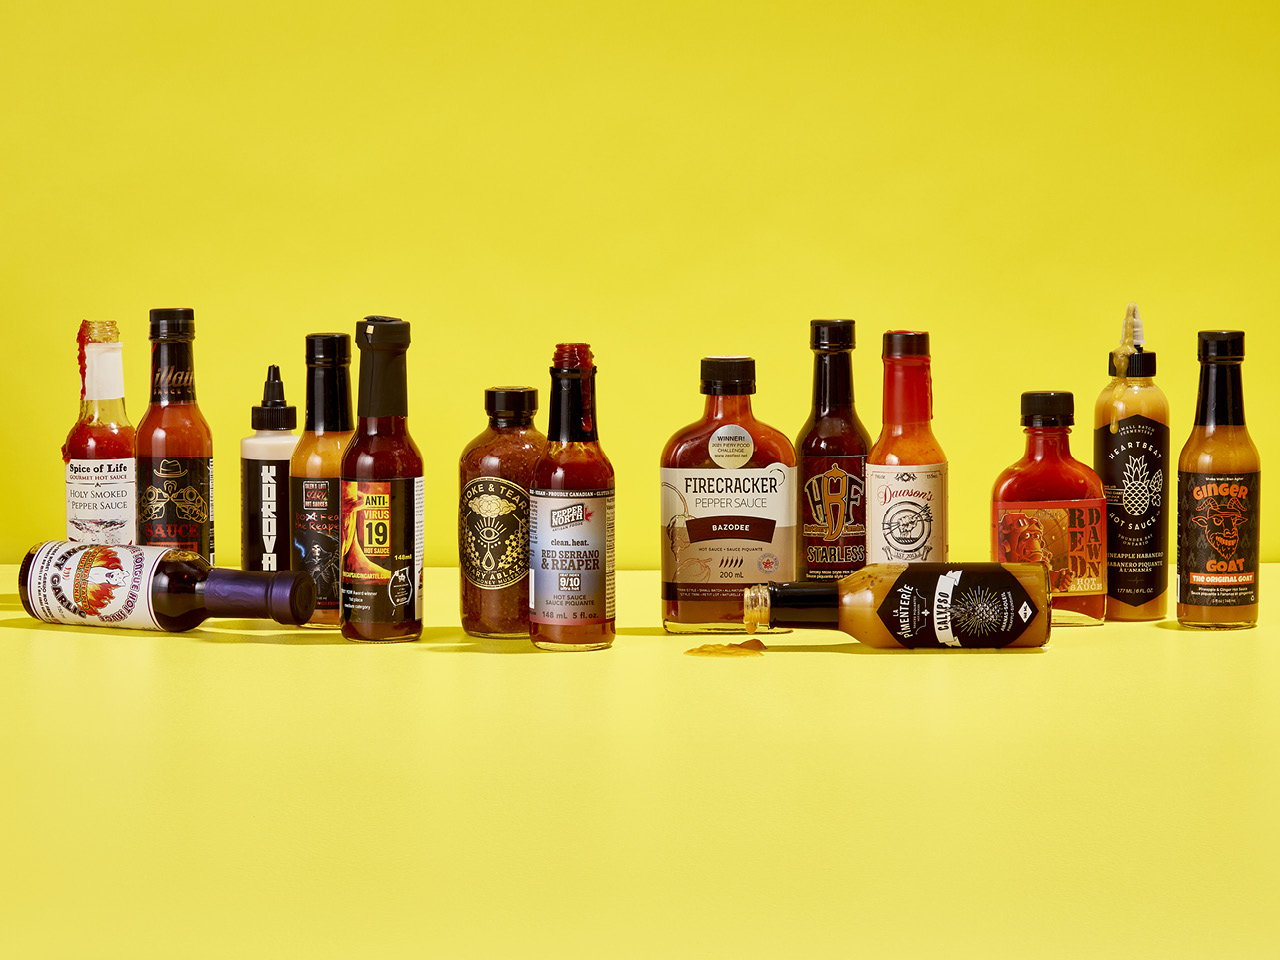 15 bottles of various hot sauces against a bright yellow backdrop